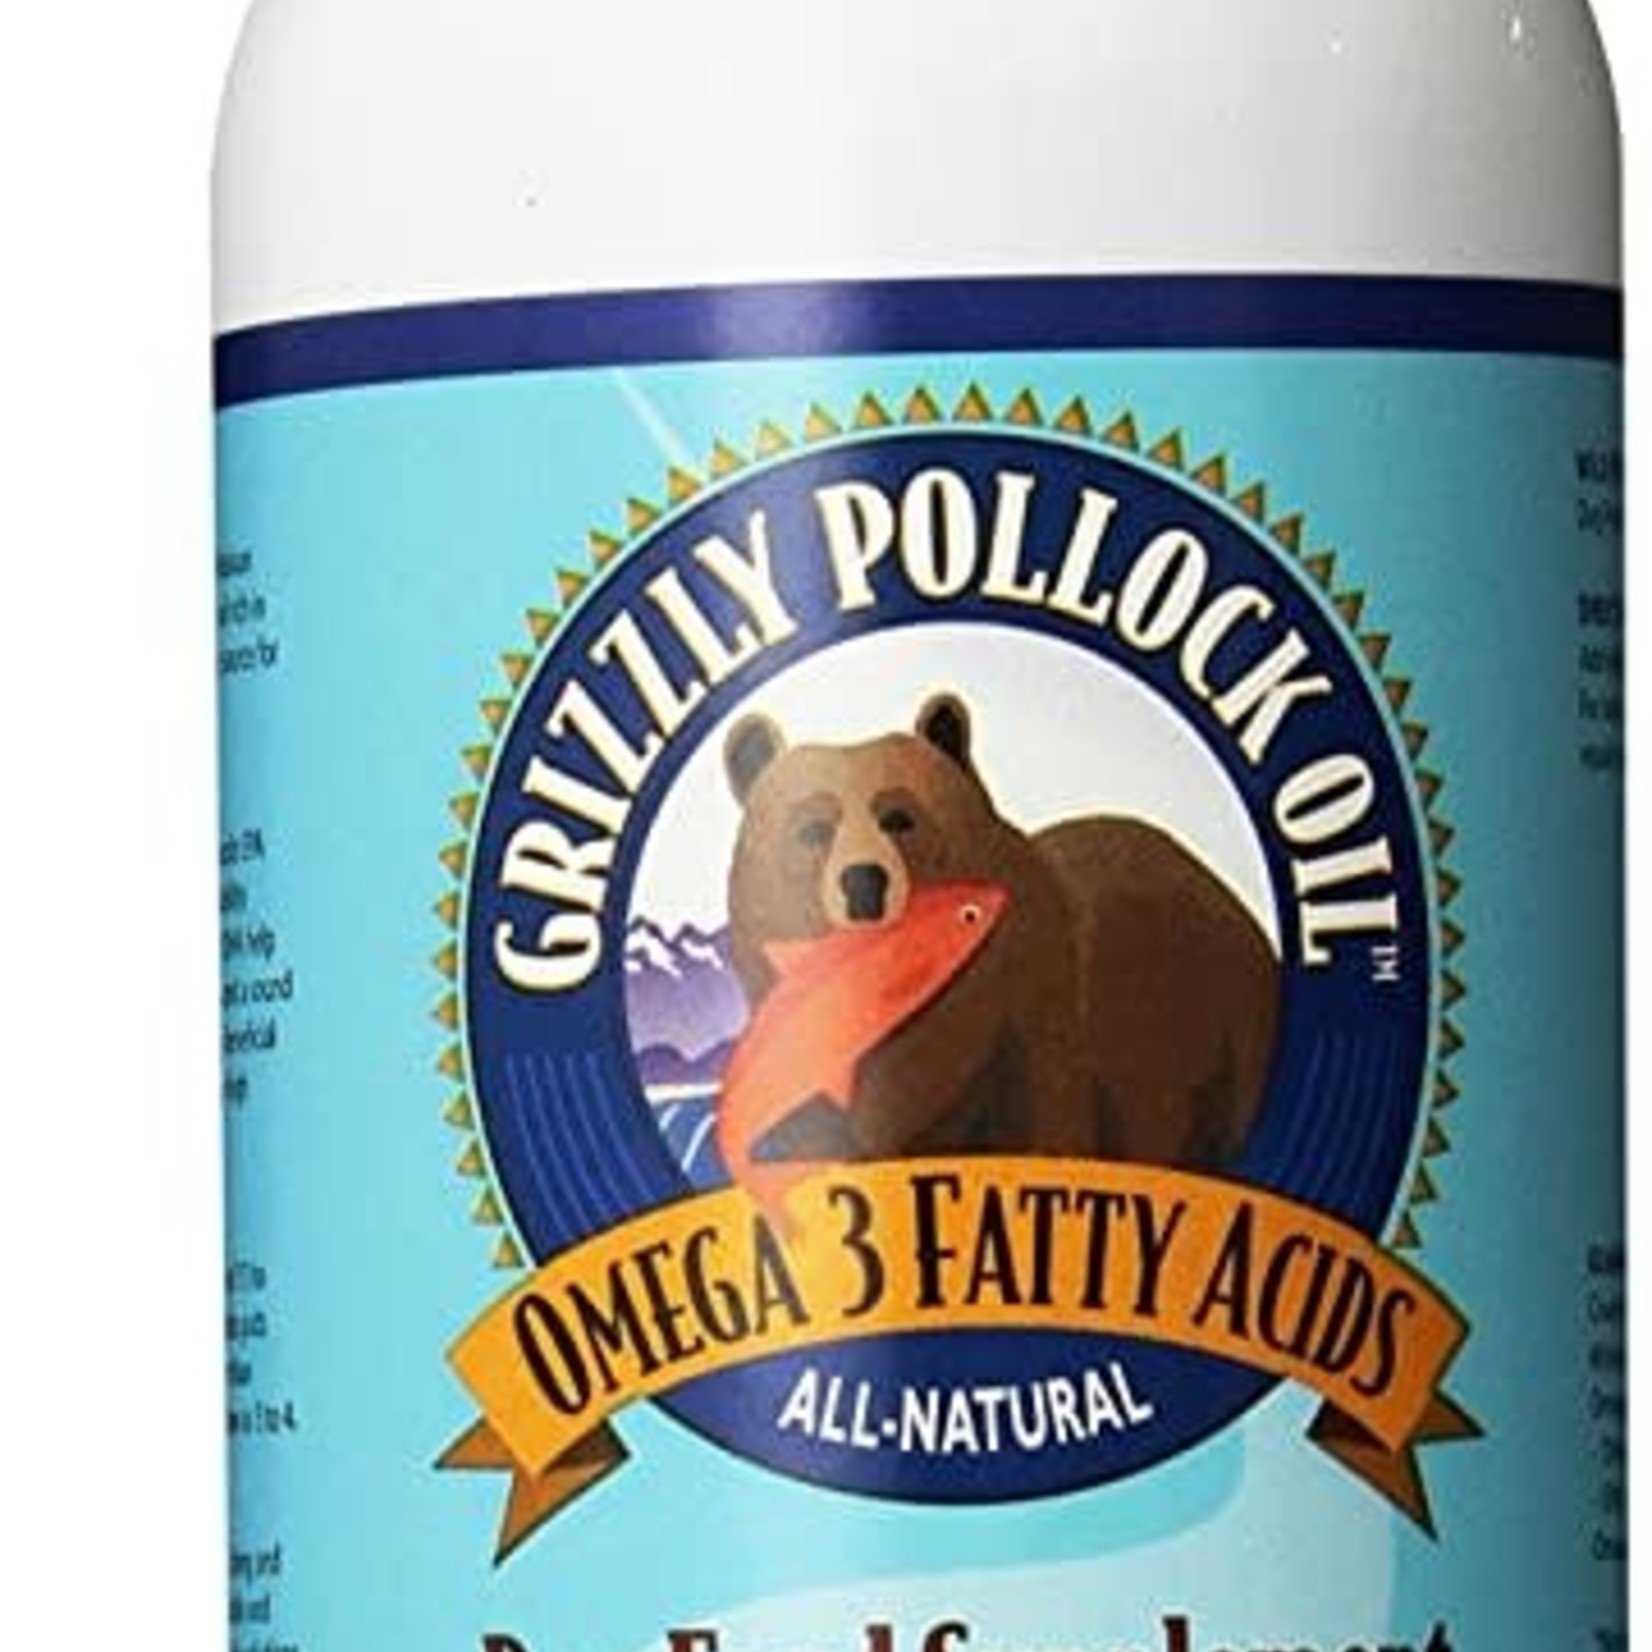 Grizzly Pollock Oil 946 ML